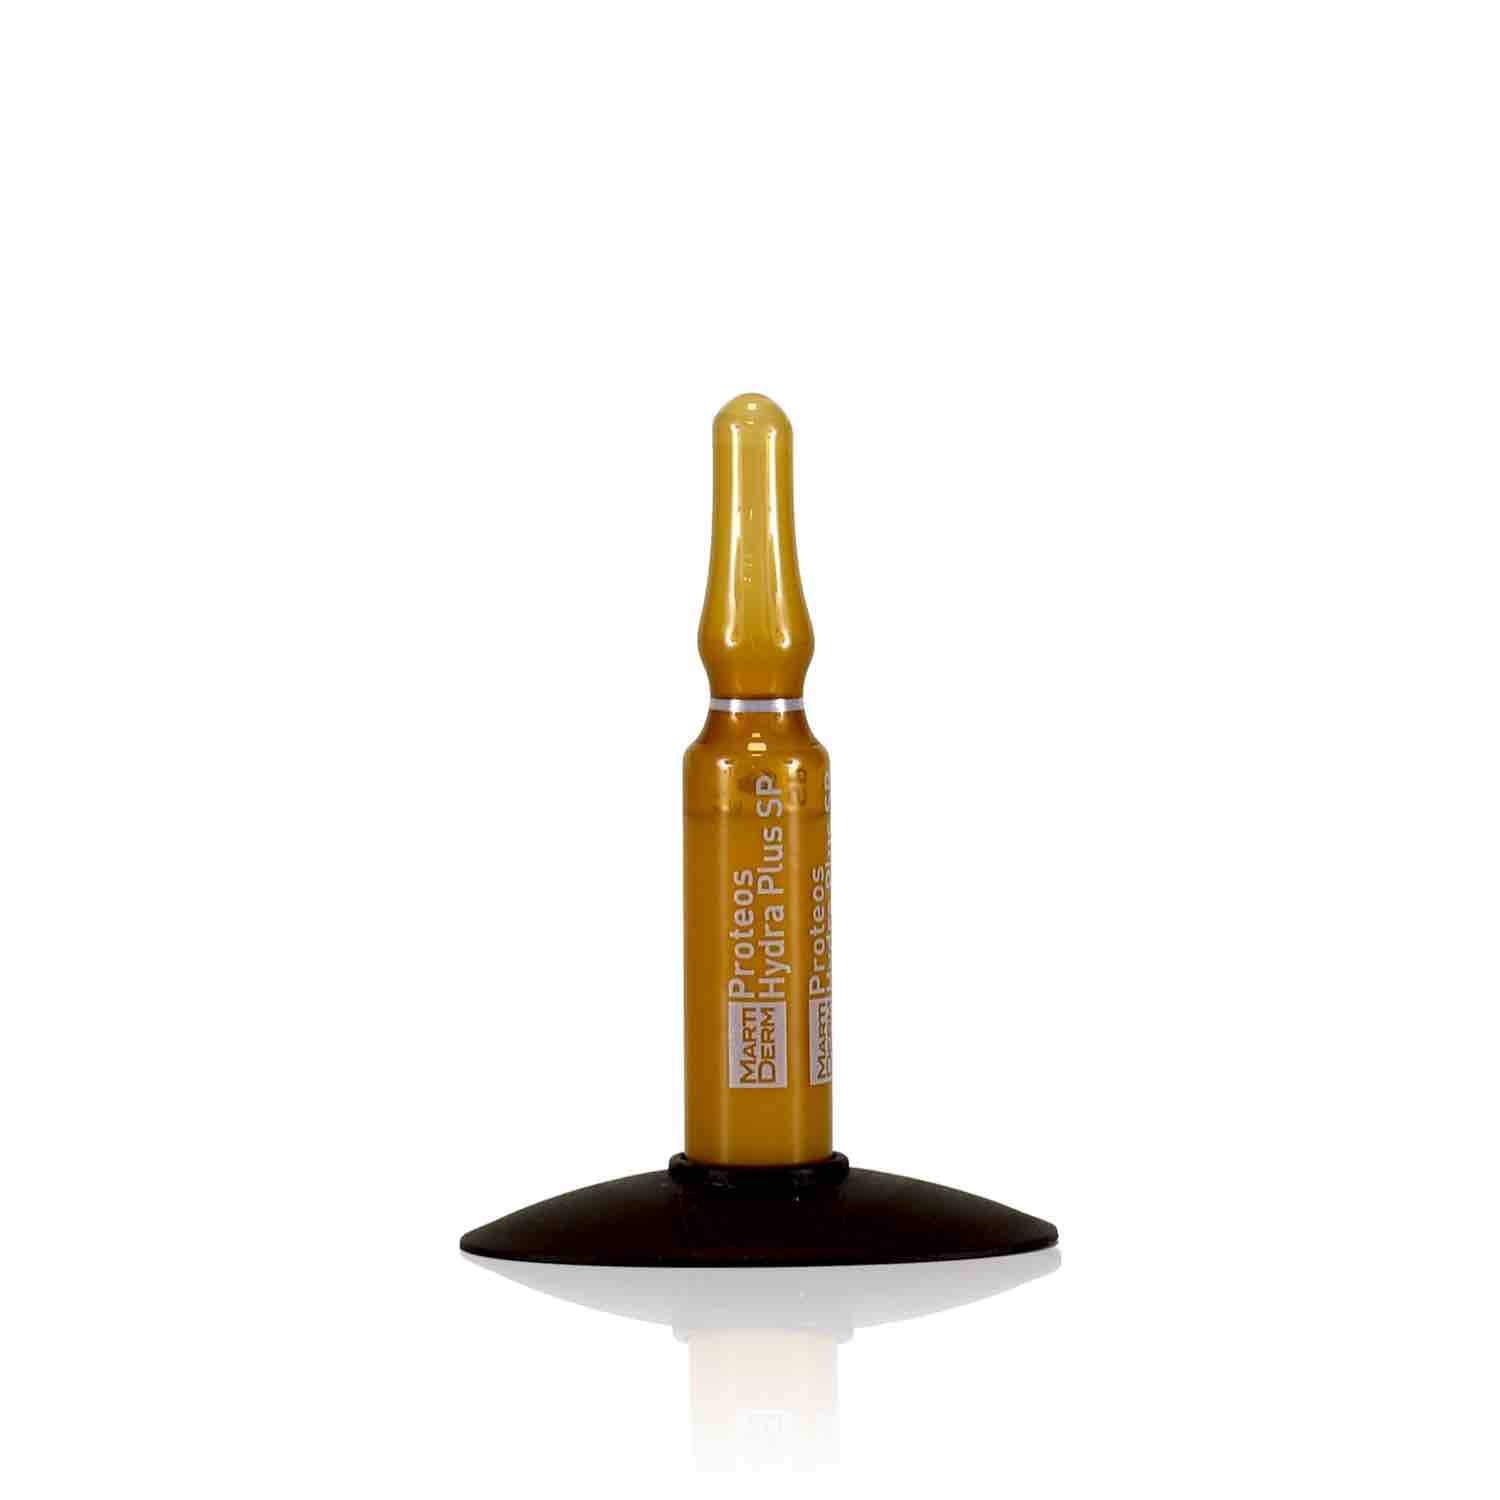 Shop Proteos Hydra Plus SP 10 Ampoules from Martiderm on SublimeLife.in. Best for moisturising and brightening skin.